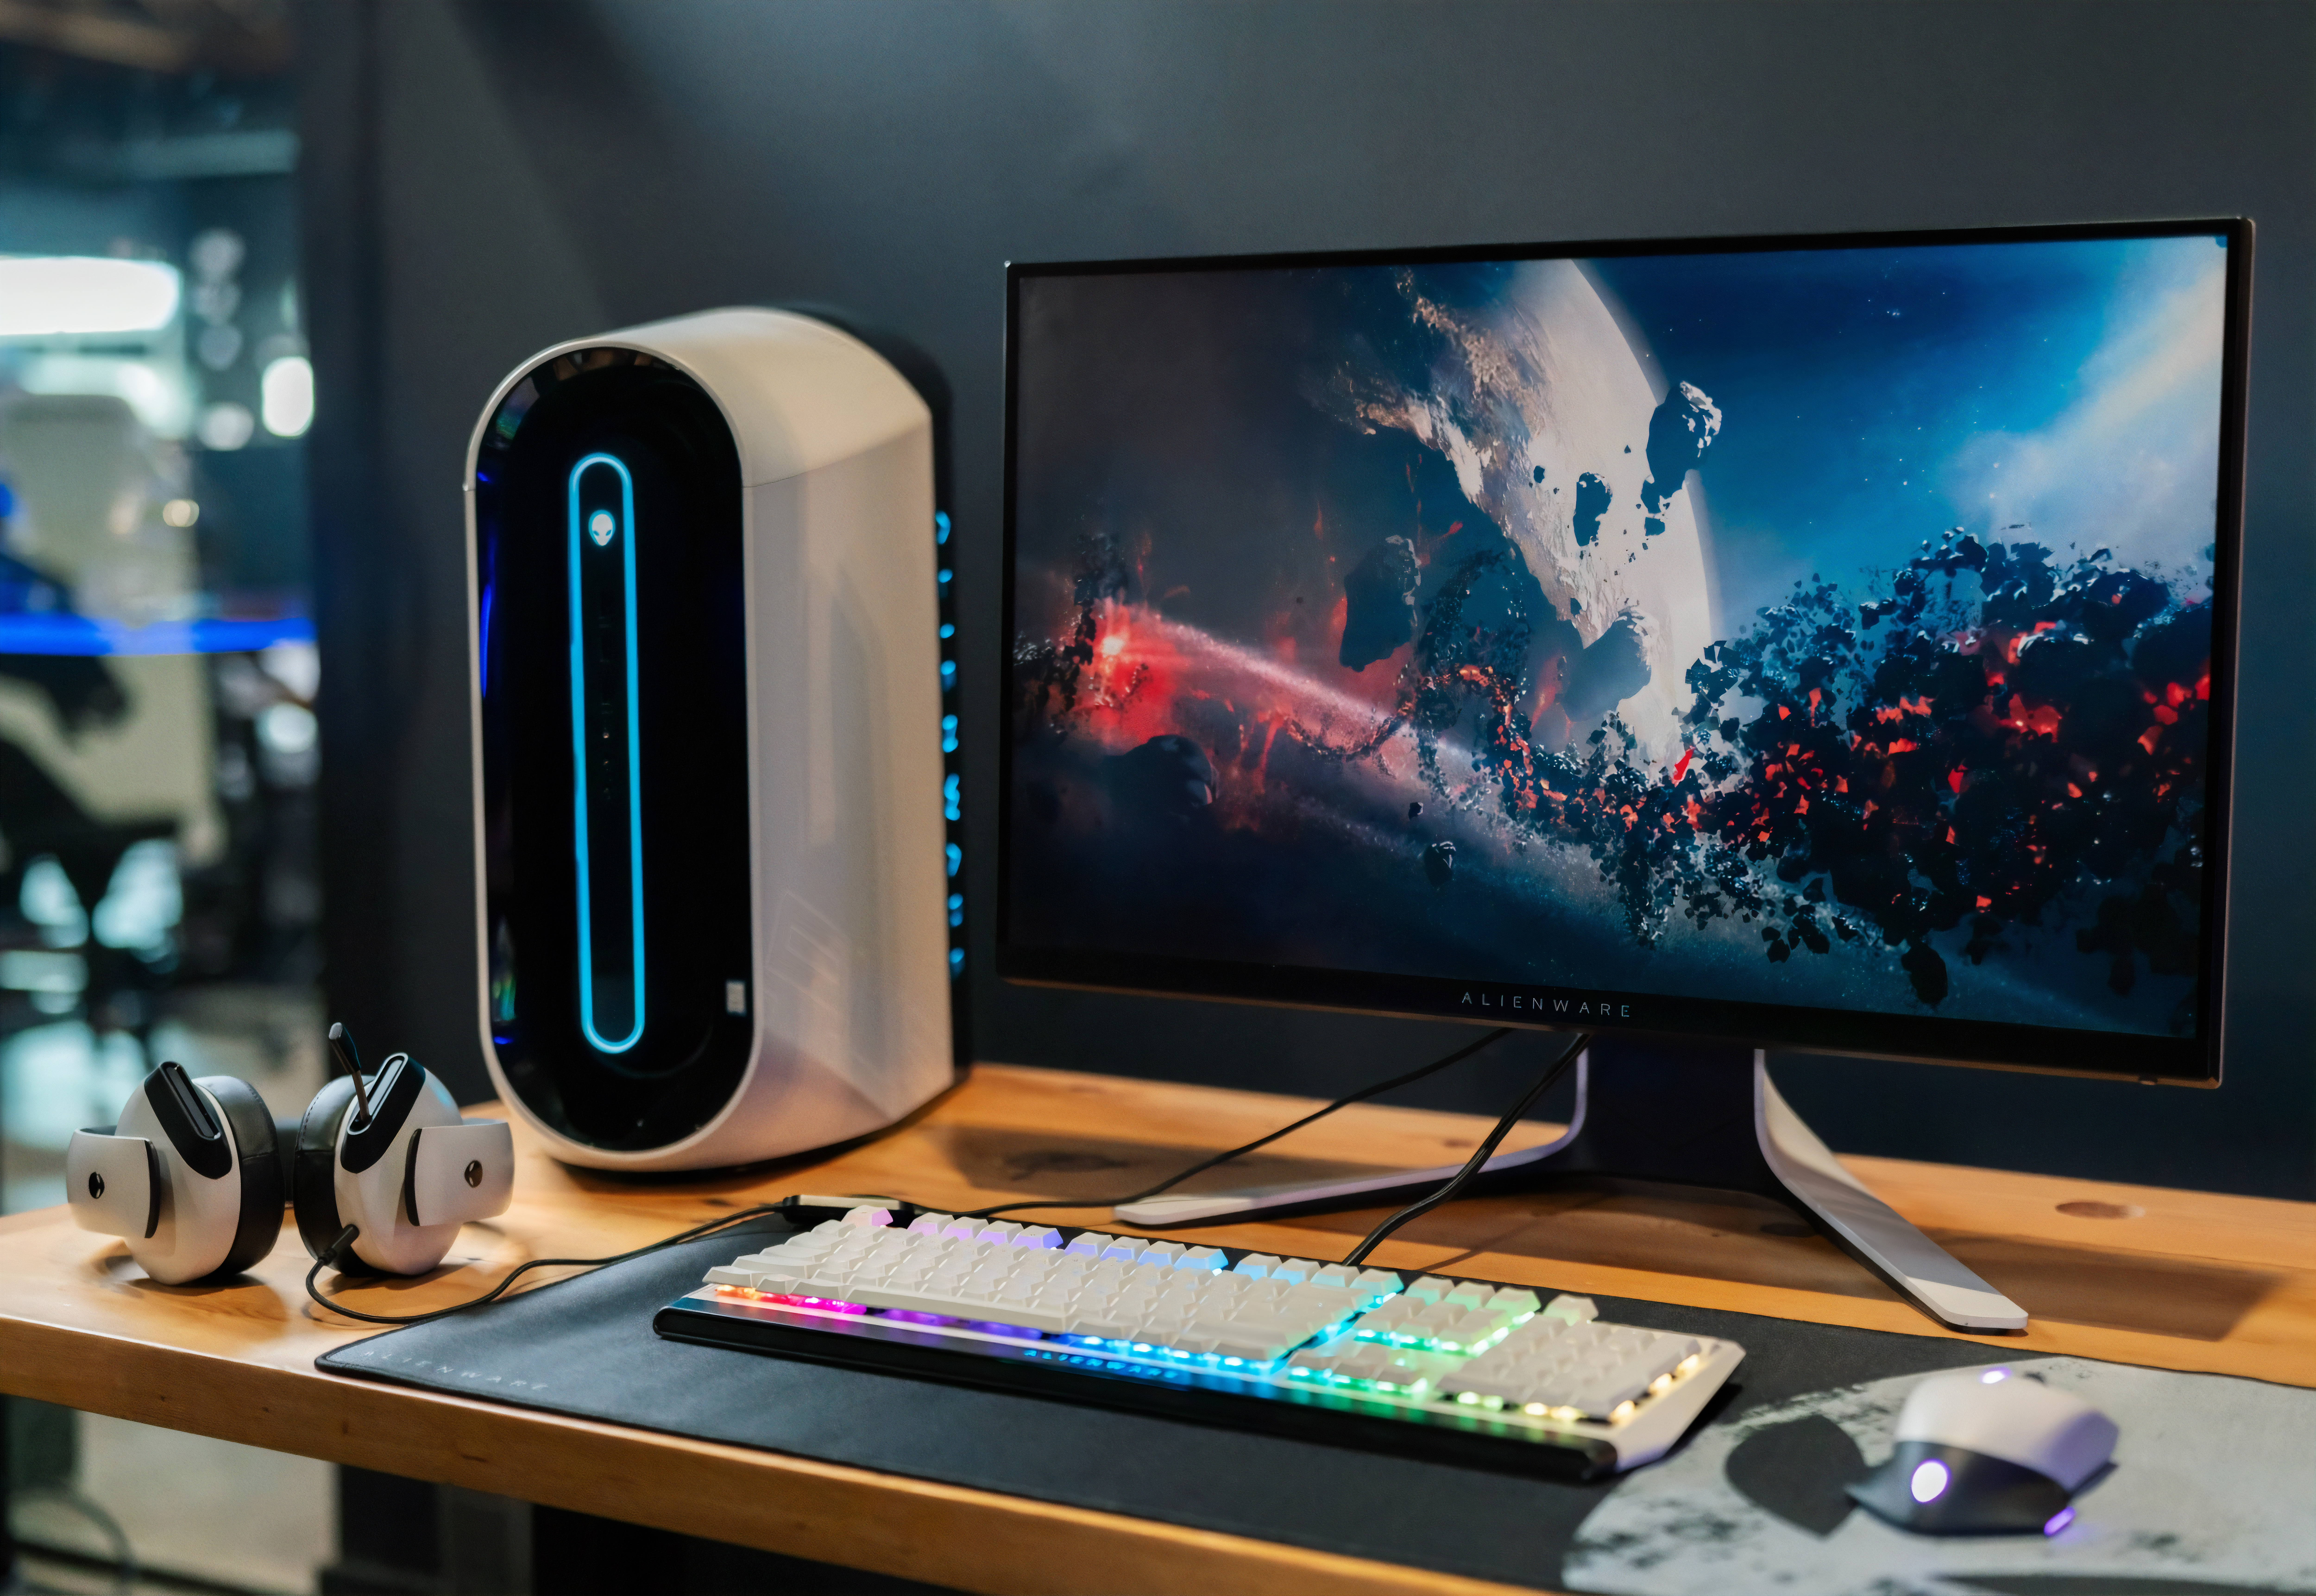 Lighting Up Your PC With These 10 Speed-Boosting Tips